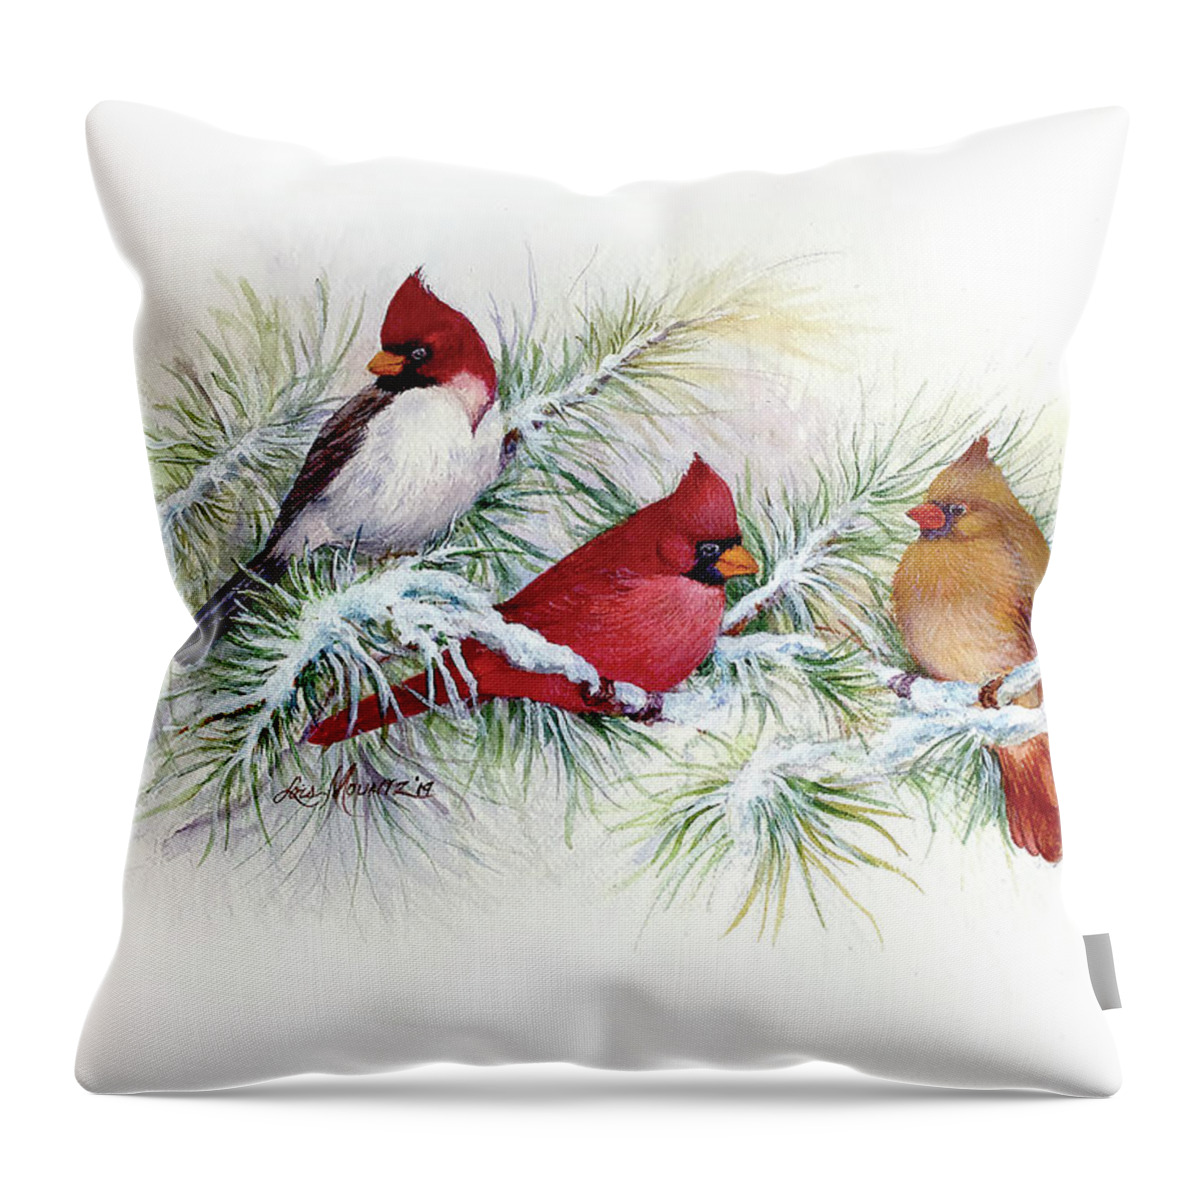 Birds Throw Pillow featuring the painting Albino Visitor by Lois Mountz